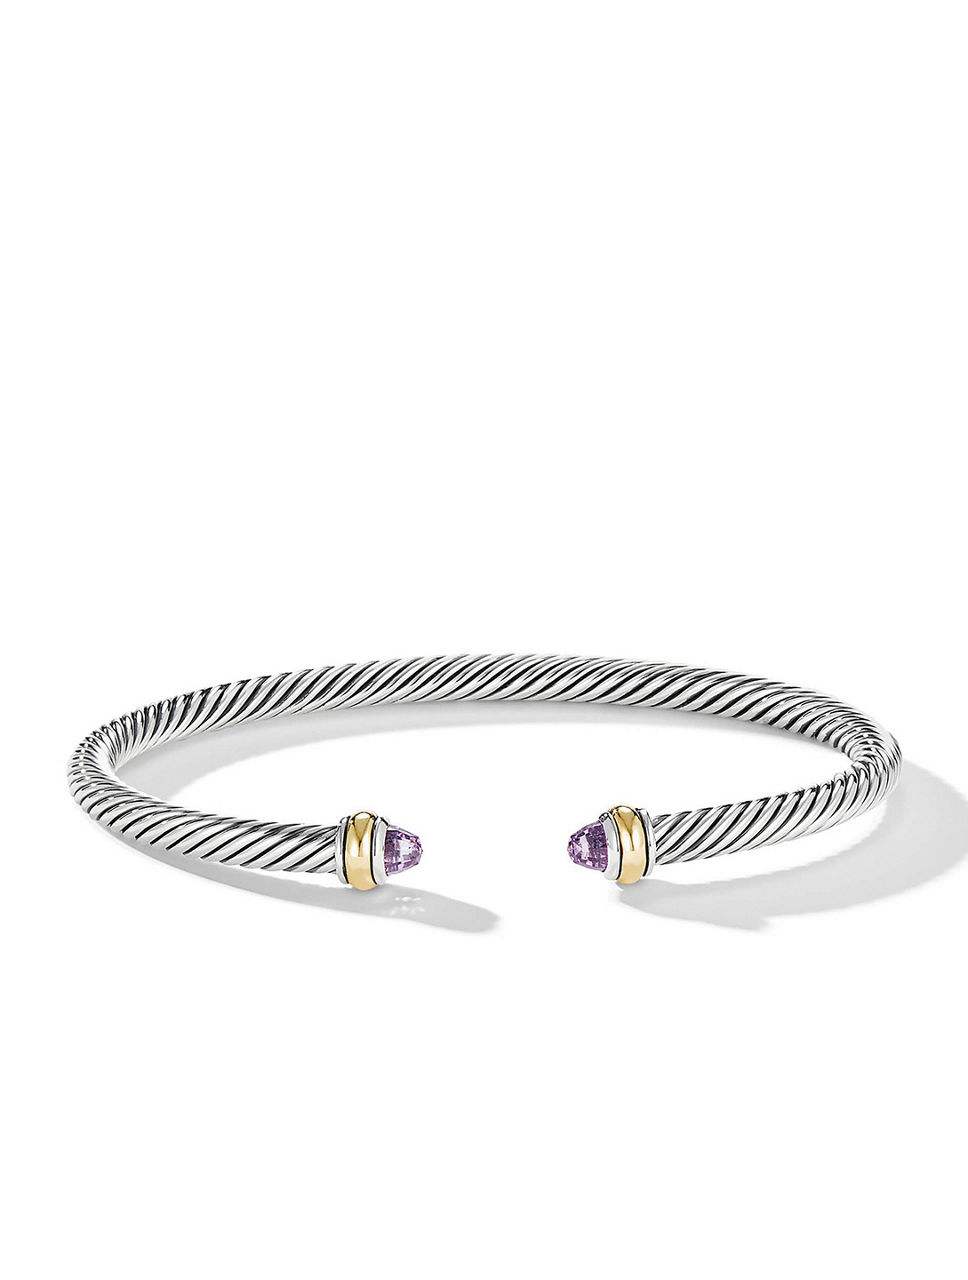 Cable Classics Bracelet Sterling Silver With Amethyst And 18k Yellow Gold